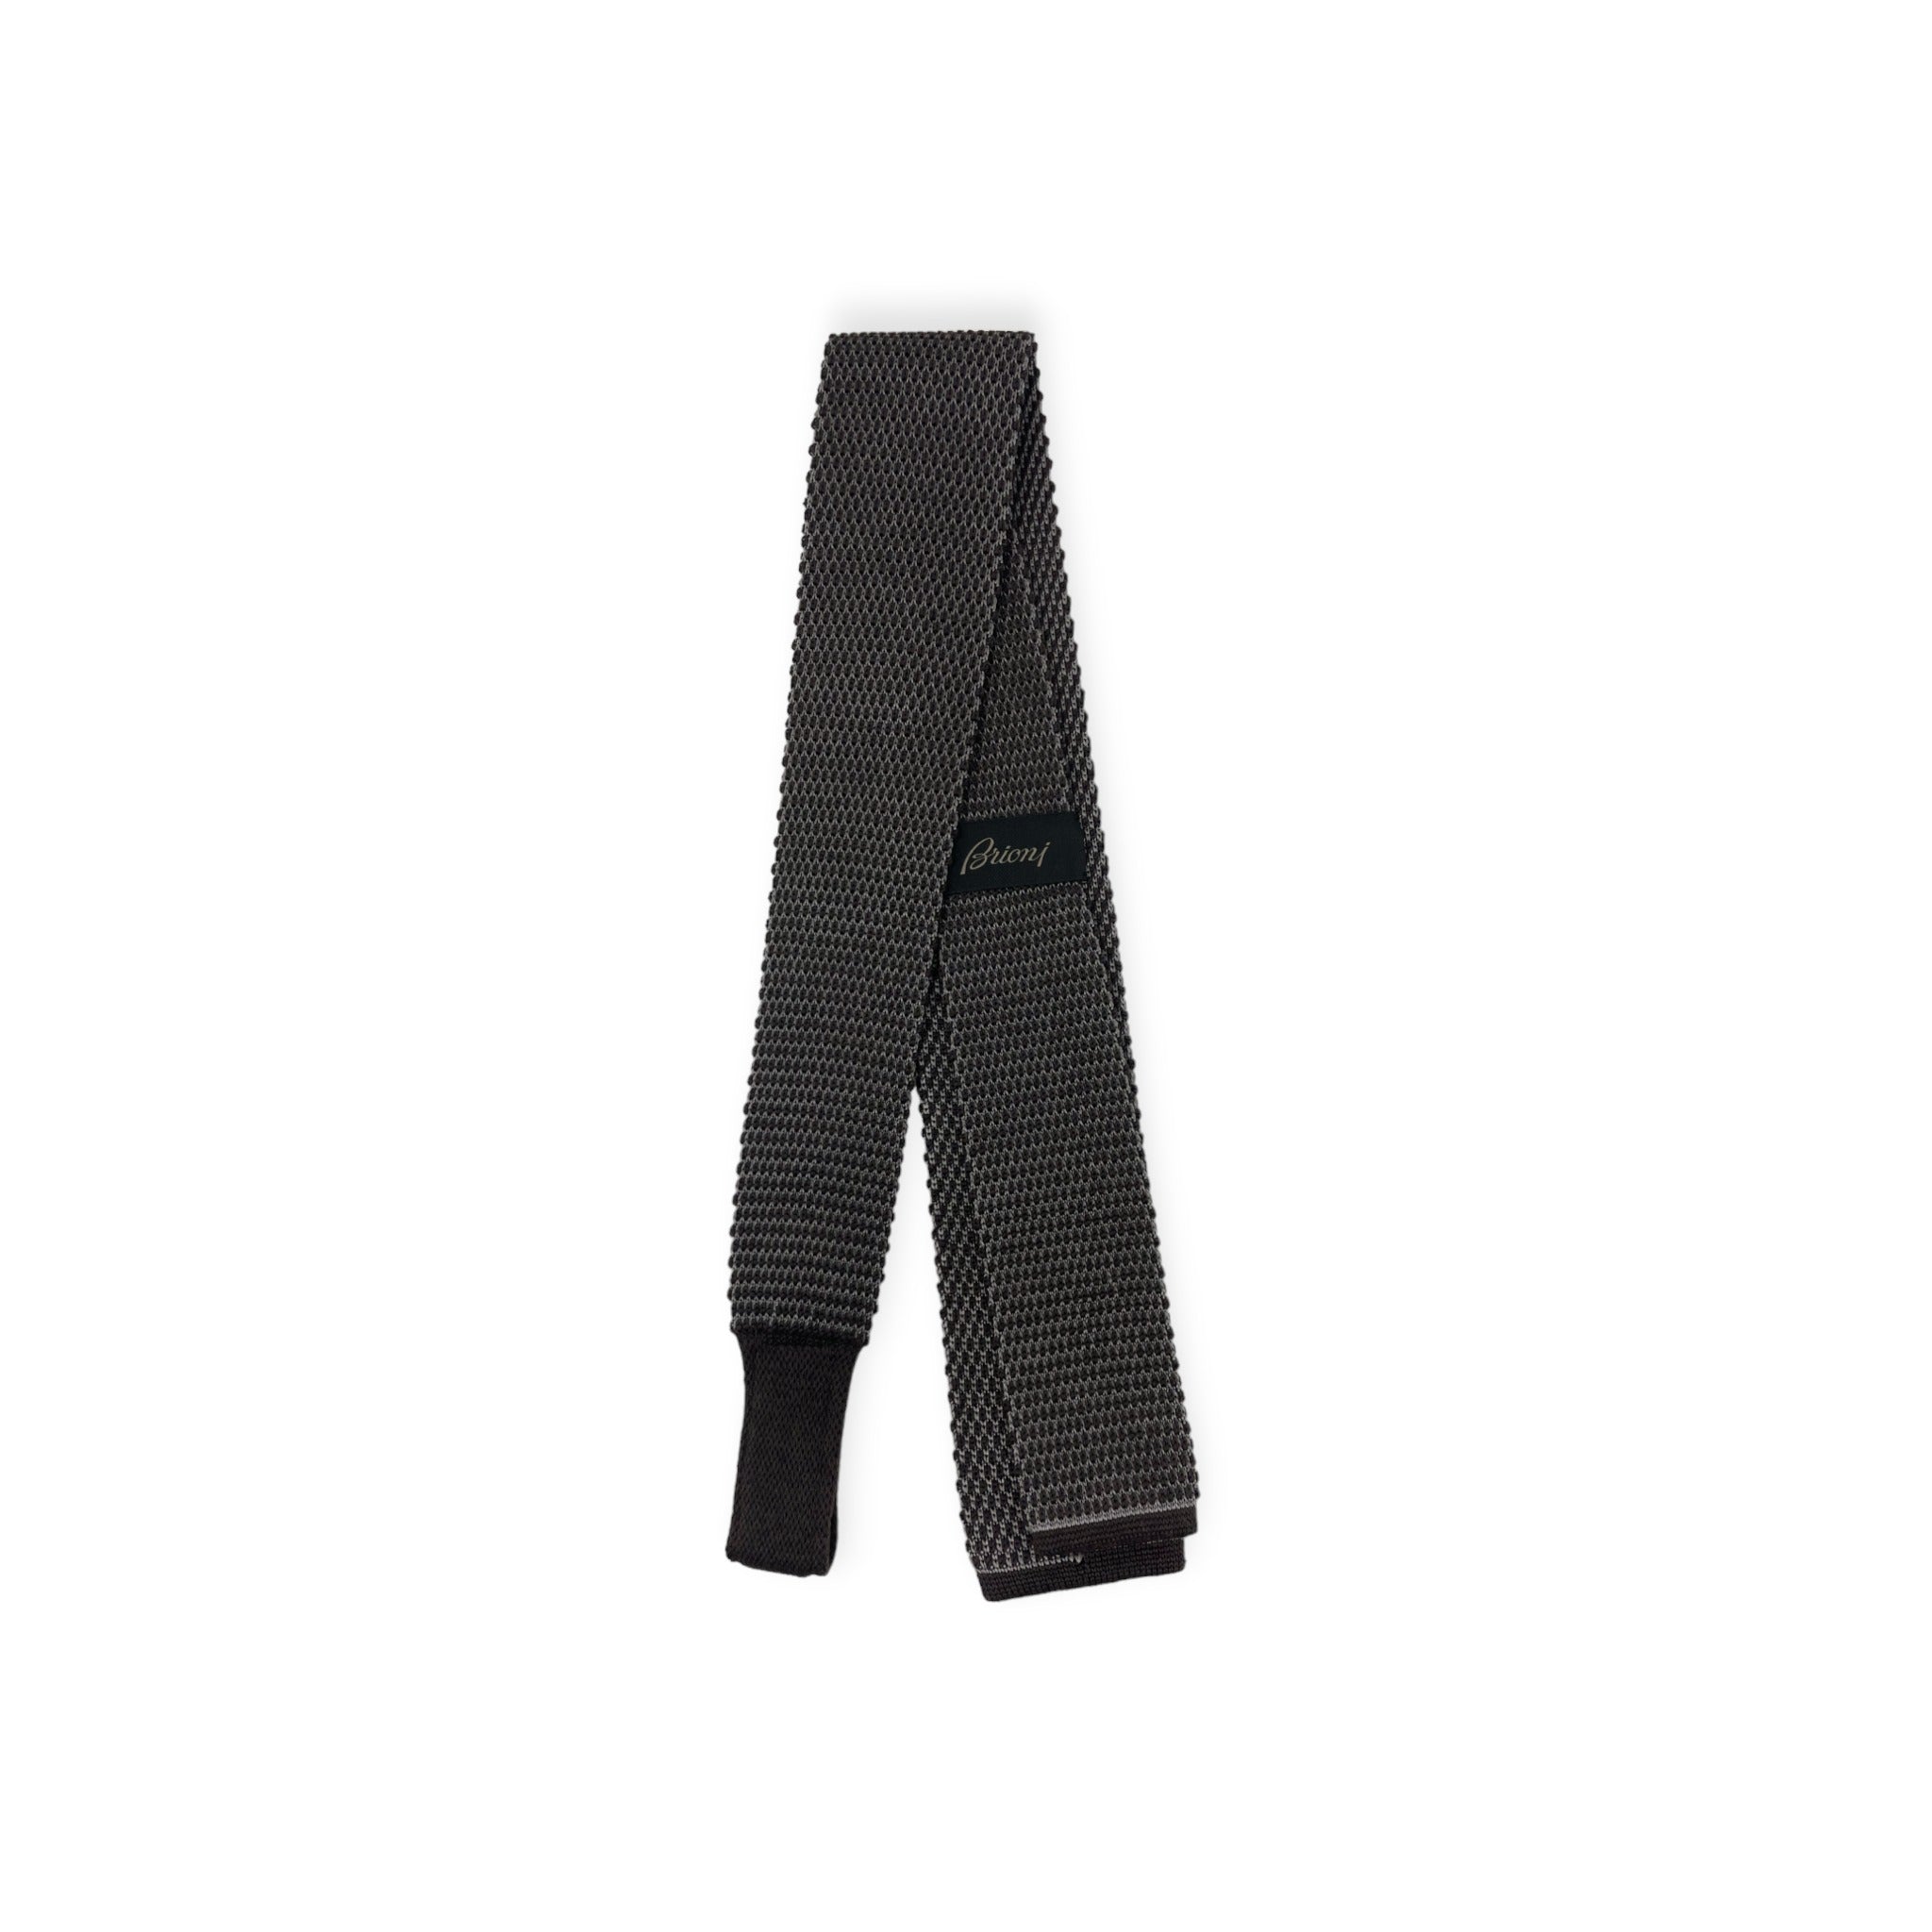 Top down view of the front of black Brioni knit tricot tie showing label